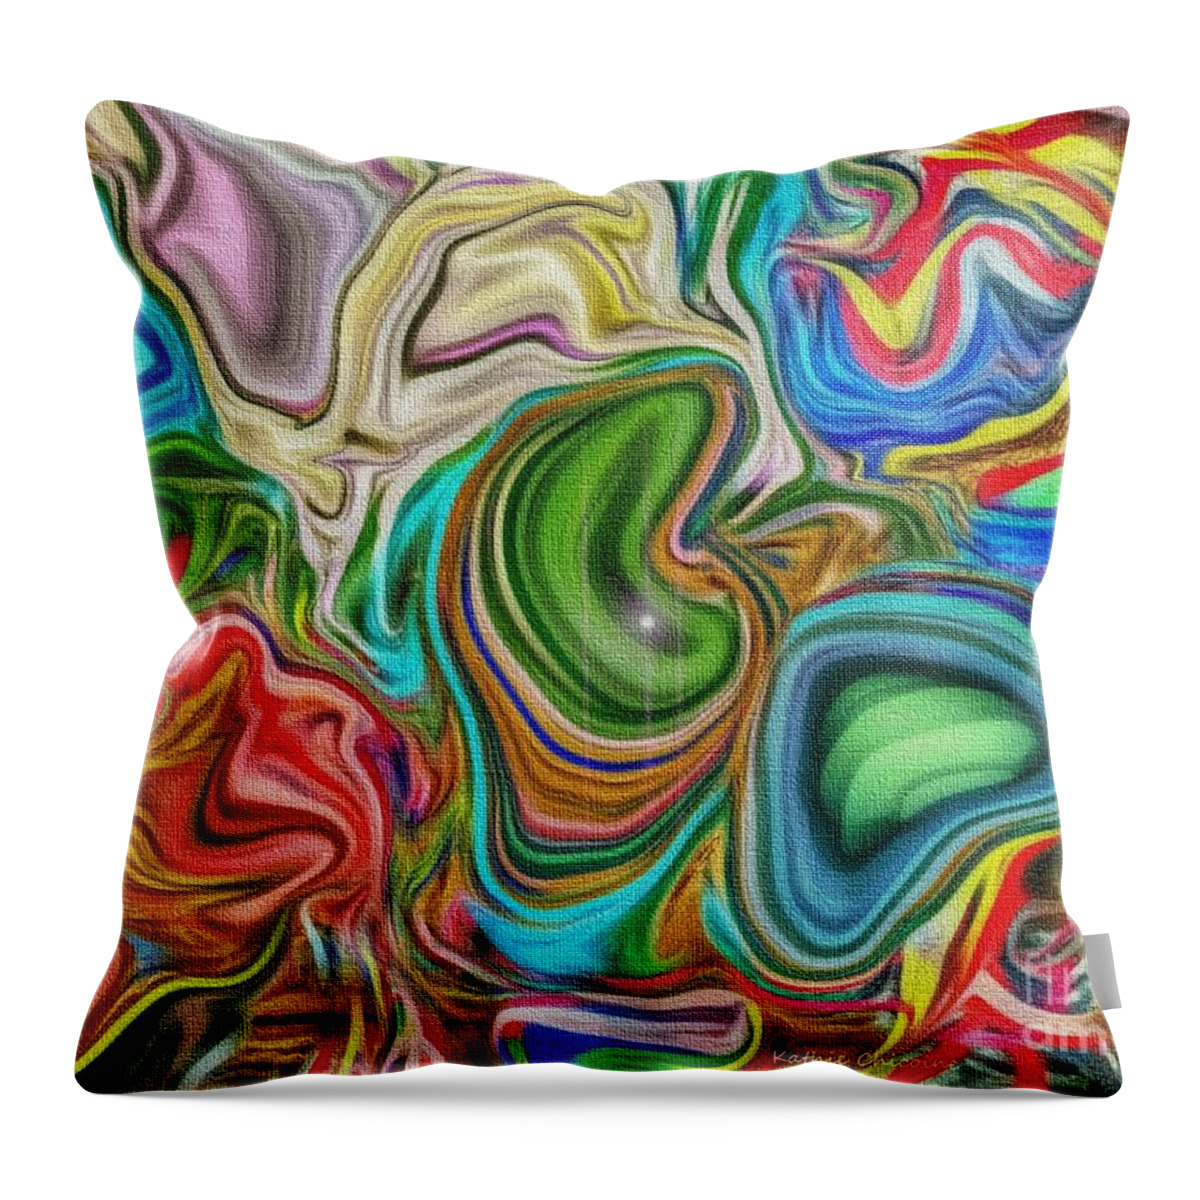 Photographic Art Throw Pillow featuring the digital art Celebration #1 by Kathie Chicoine